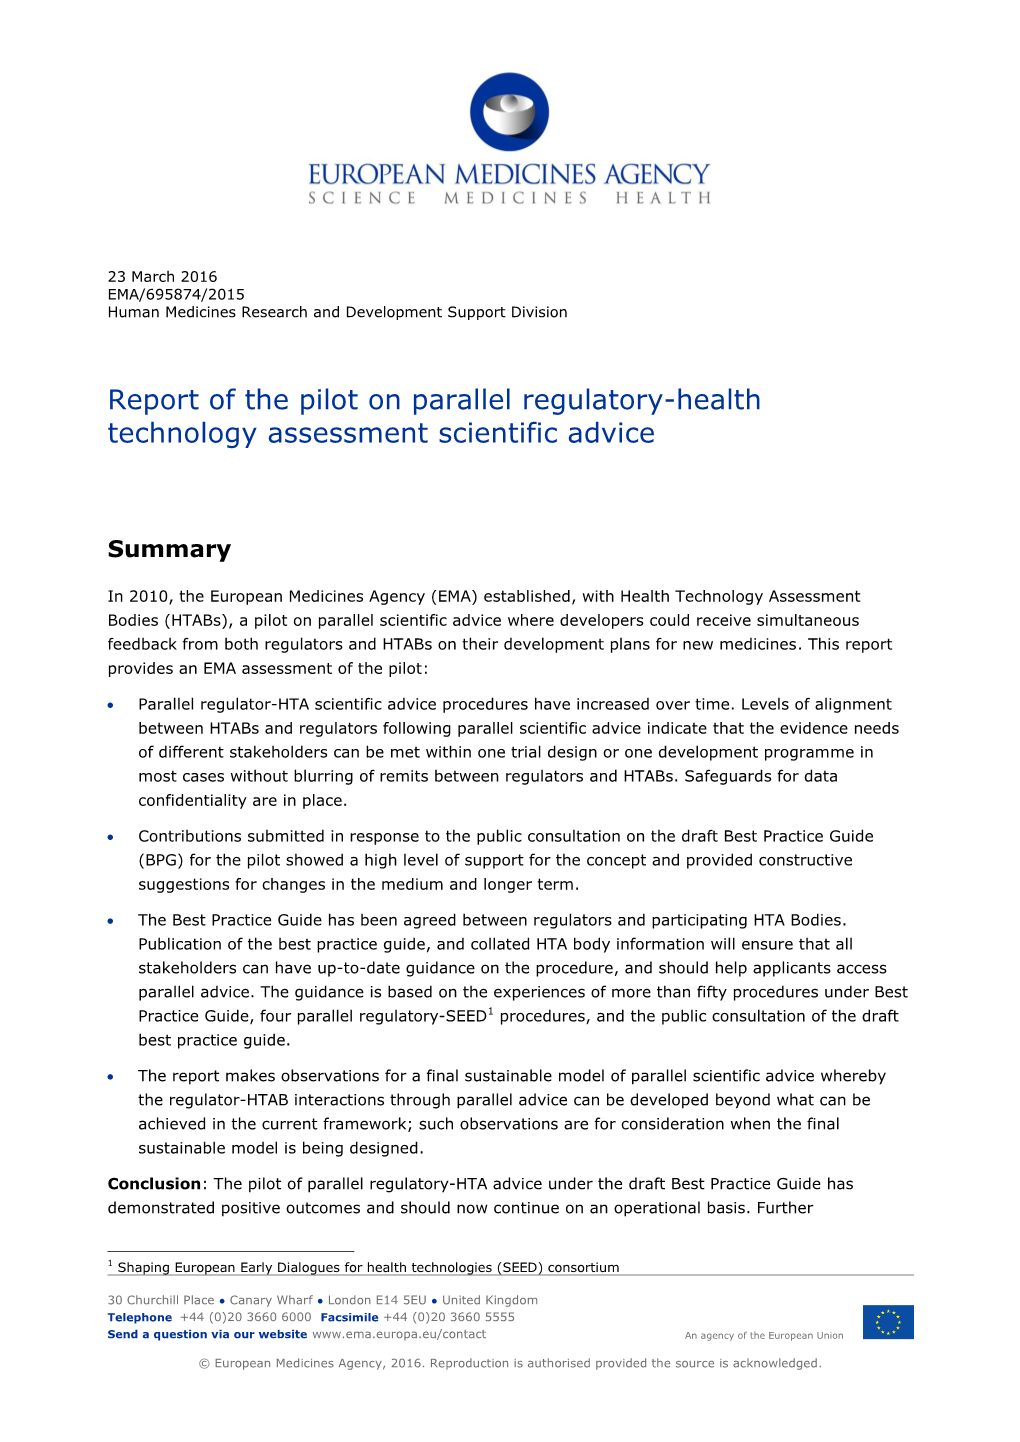 Report of the Pilot on Parallel Regulatory-Health Technology Assessment Scientific Advice